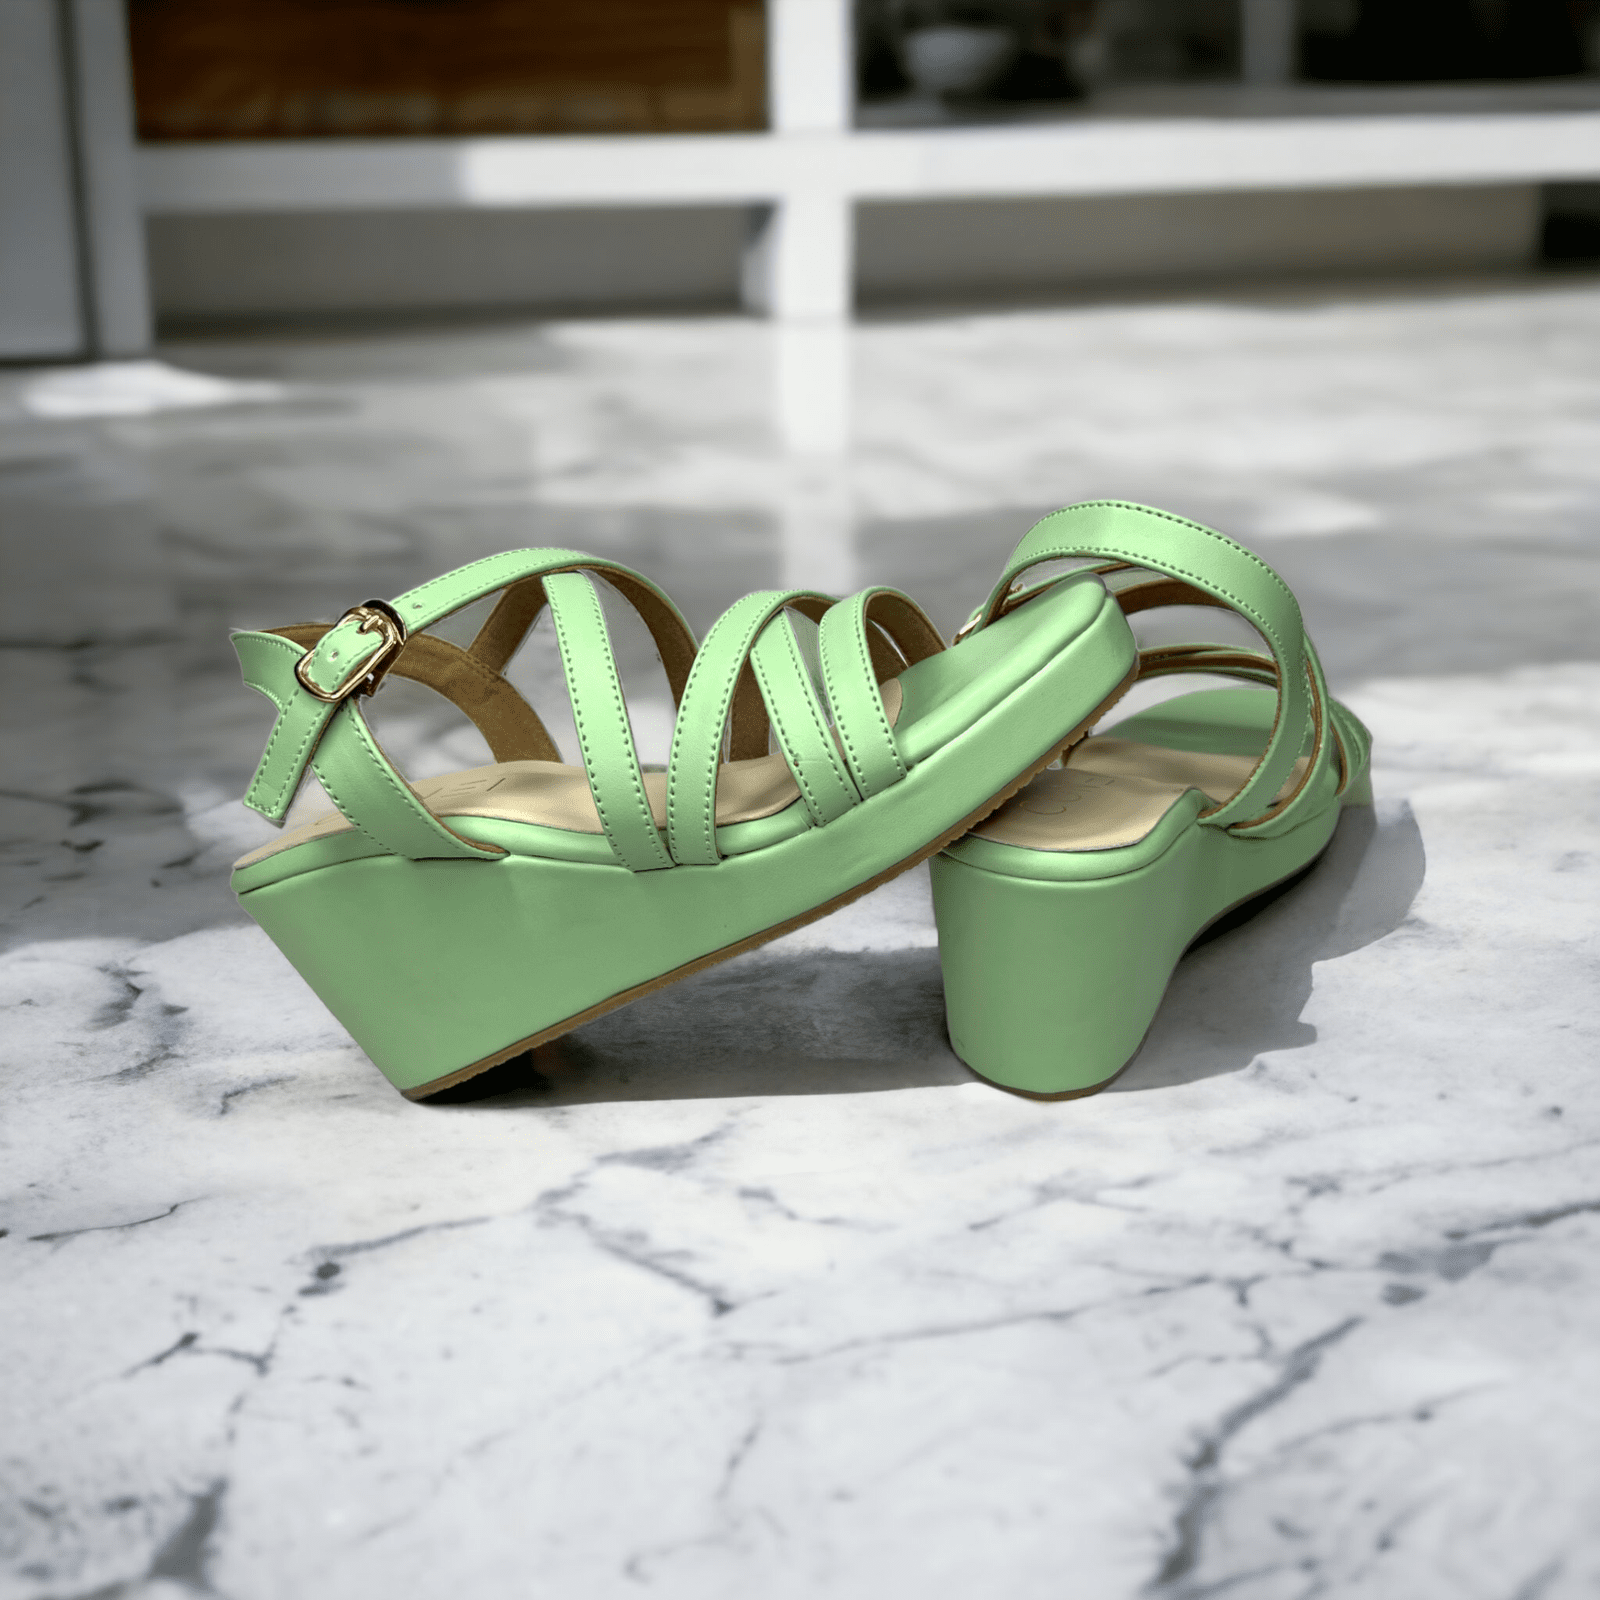 Pure Pastel Green Wedges - Wedges